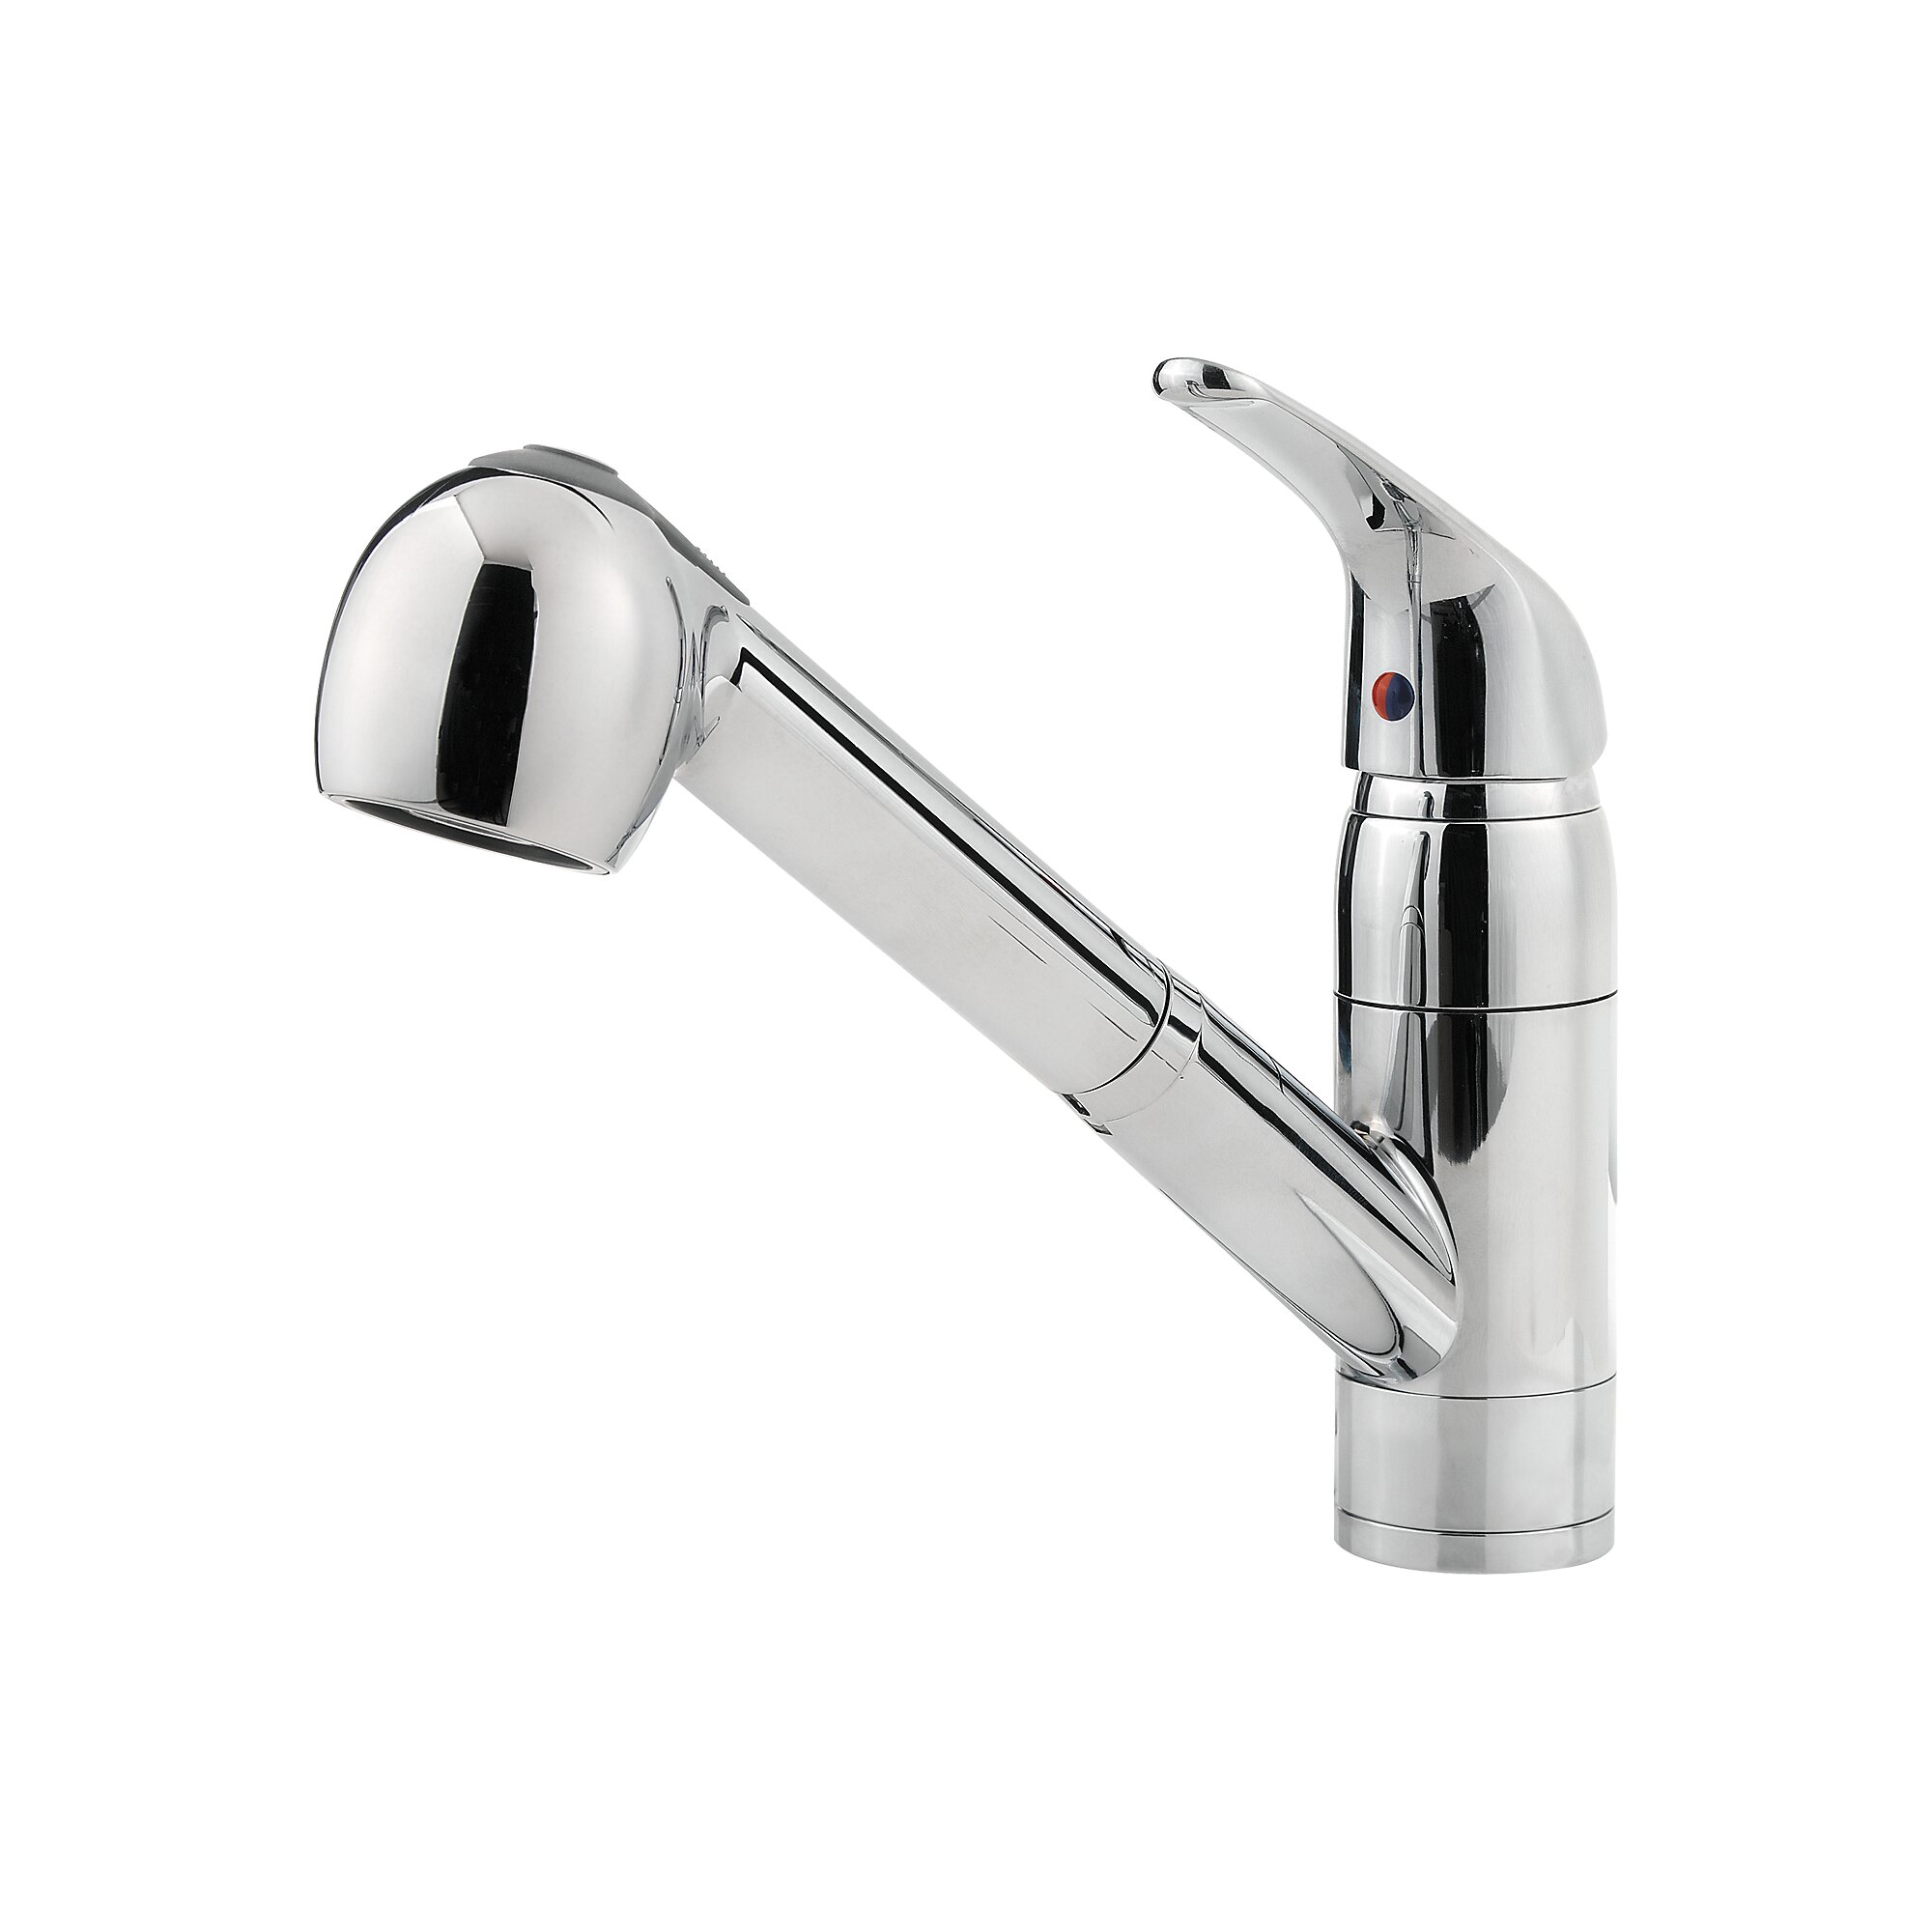 PFISTER G133-10 PFIRST SERIES 9 7/8 INCH SINGLE LEVER HANDLE DECK MOUNT PULL-OUT KITCHEN FAUCET